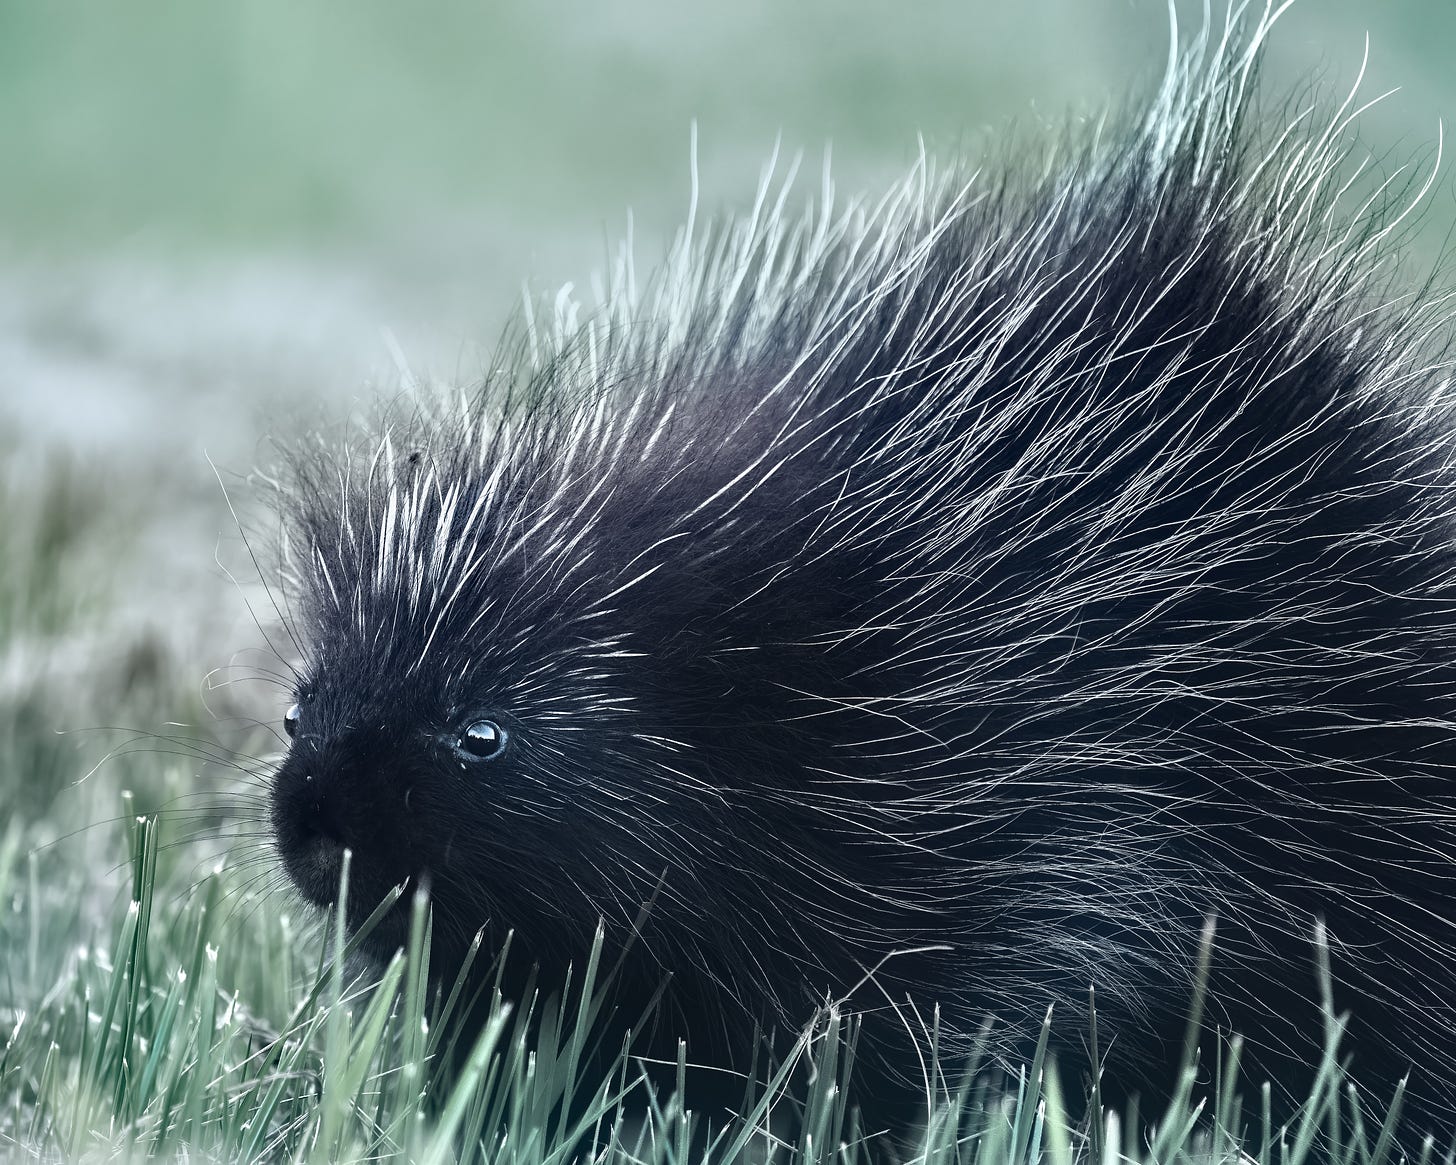 A young porcupette (baby porcupine) with black fur and white quills and a sweet little face